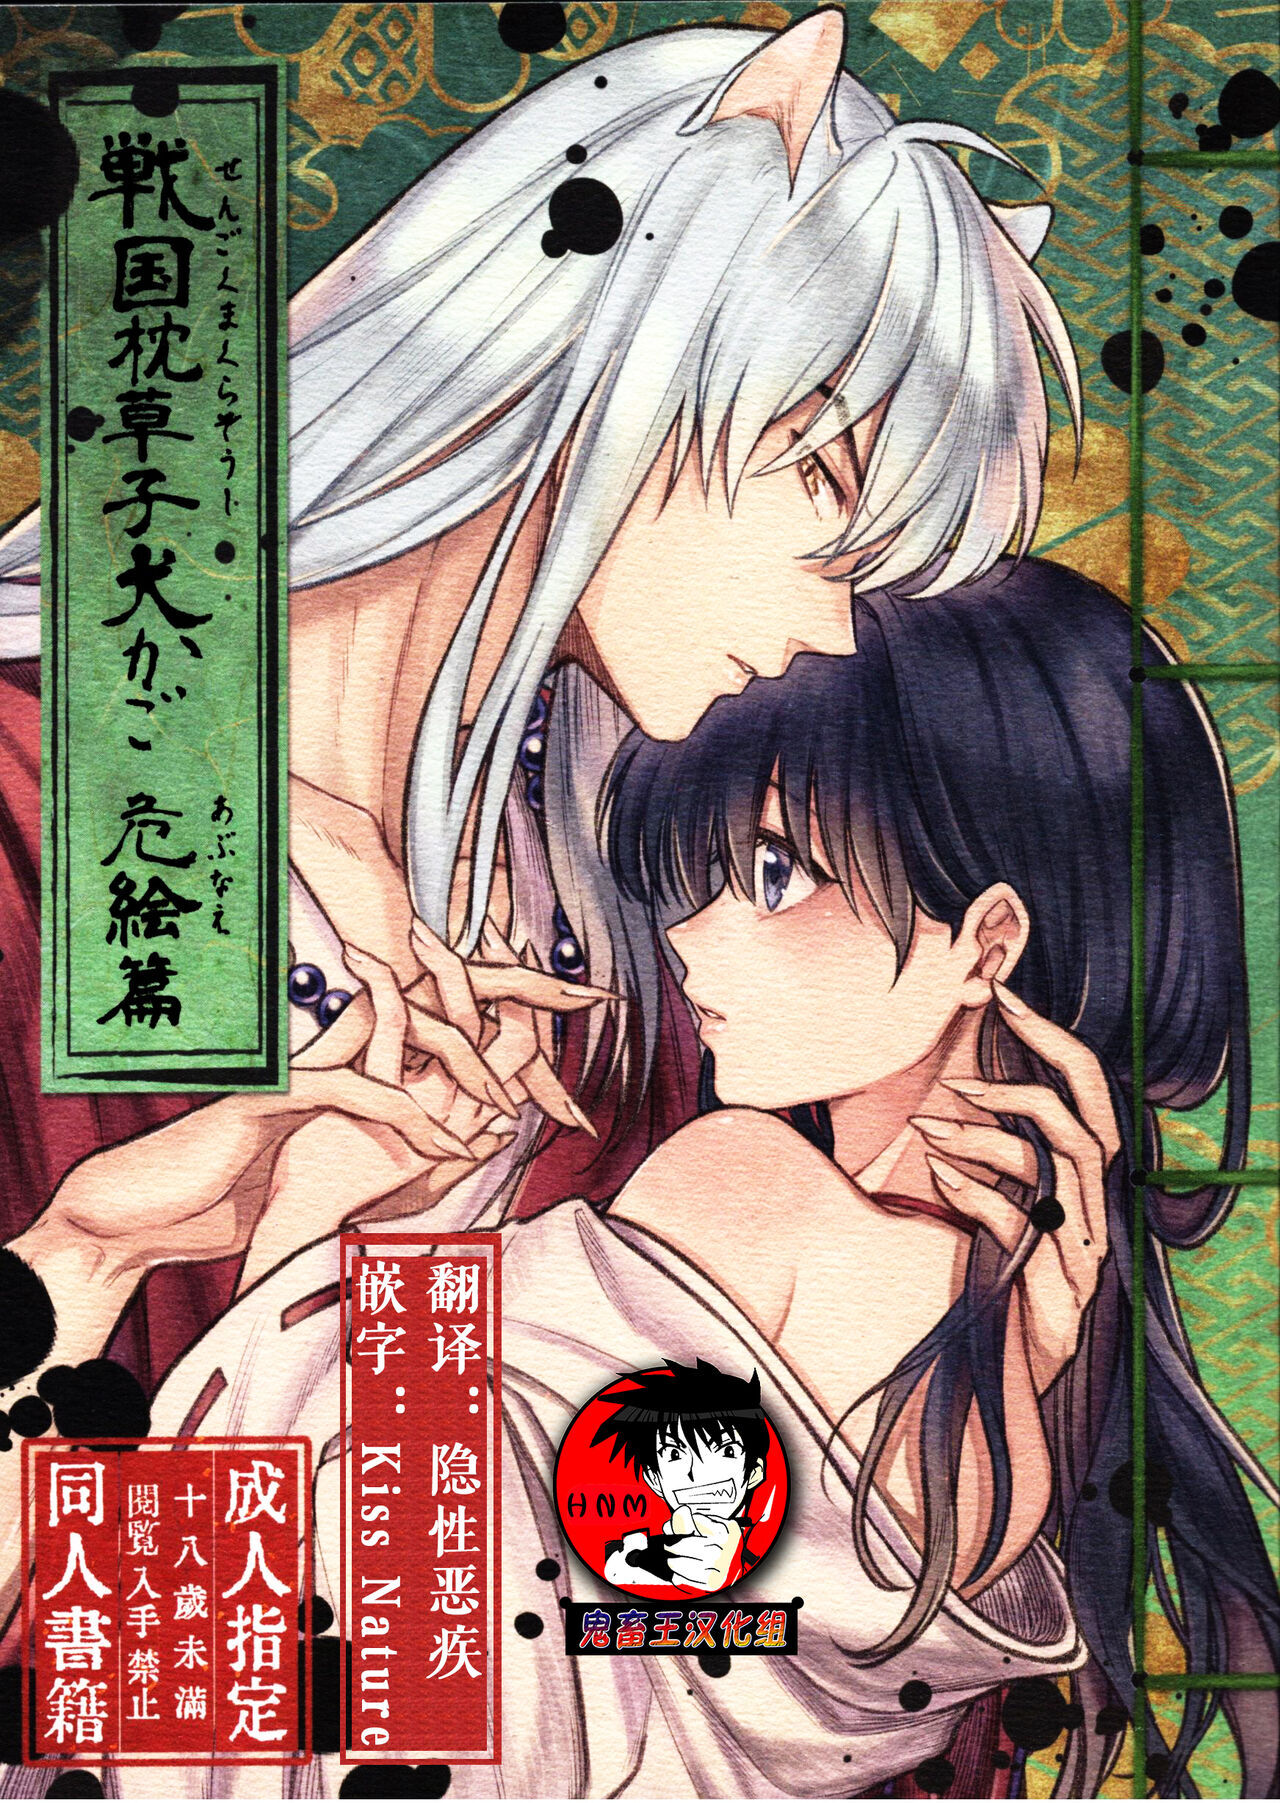 Sexy Inuyasha Porn - Inuyasha - sorted by number of objects - Free Hentai